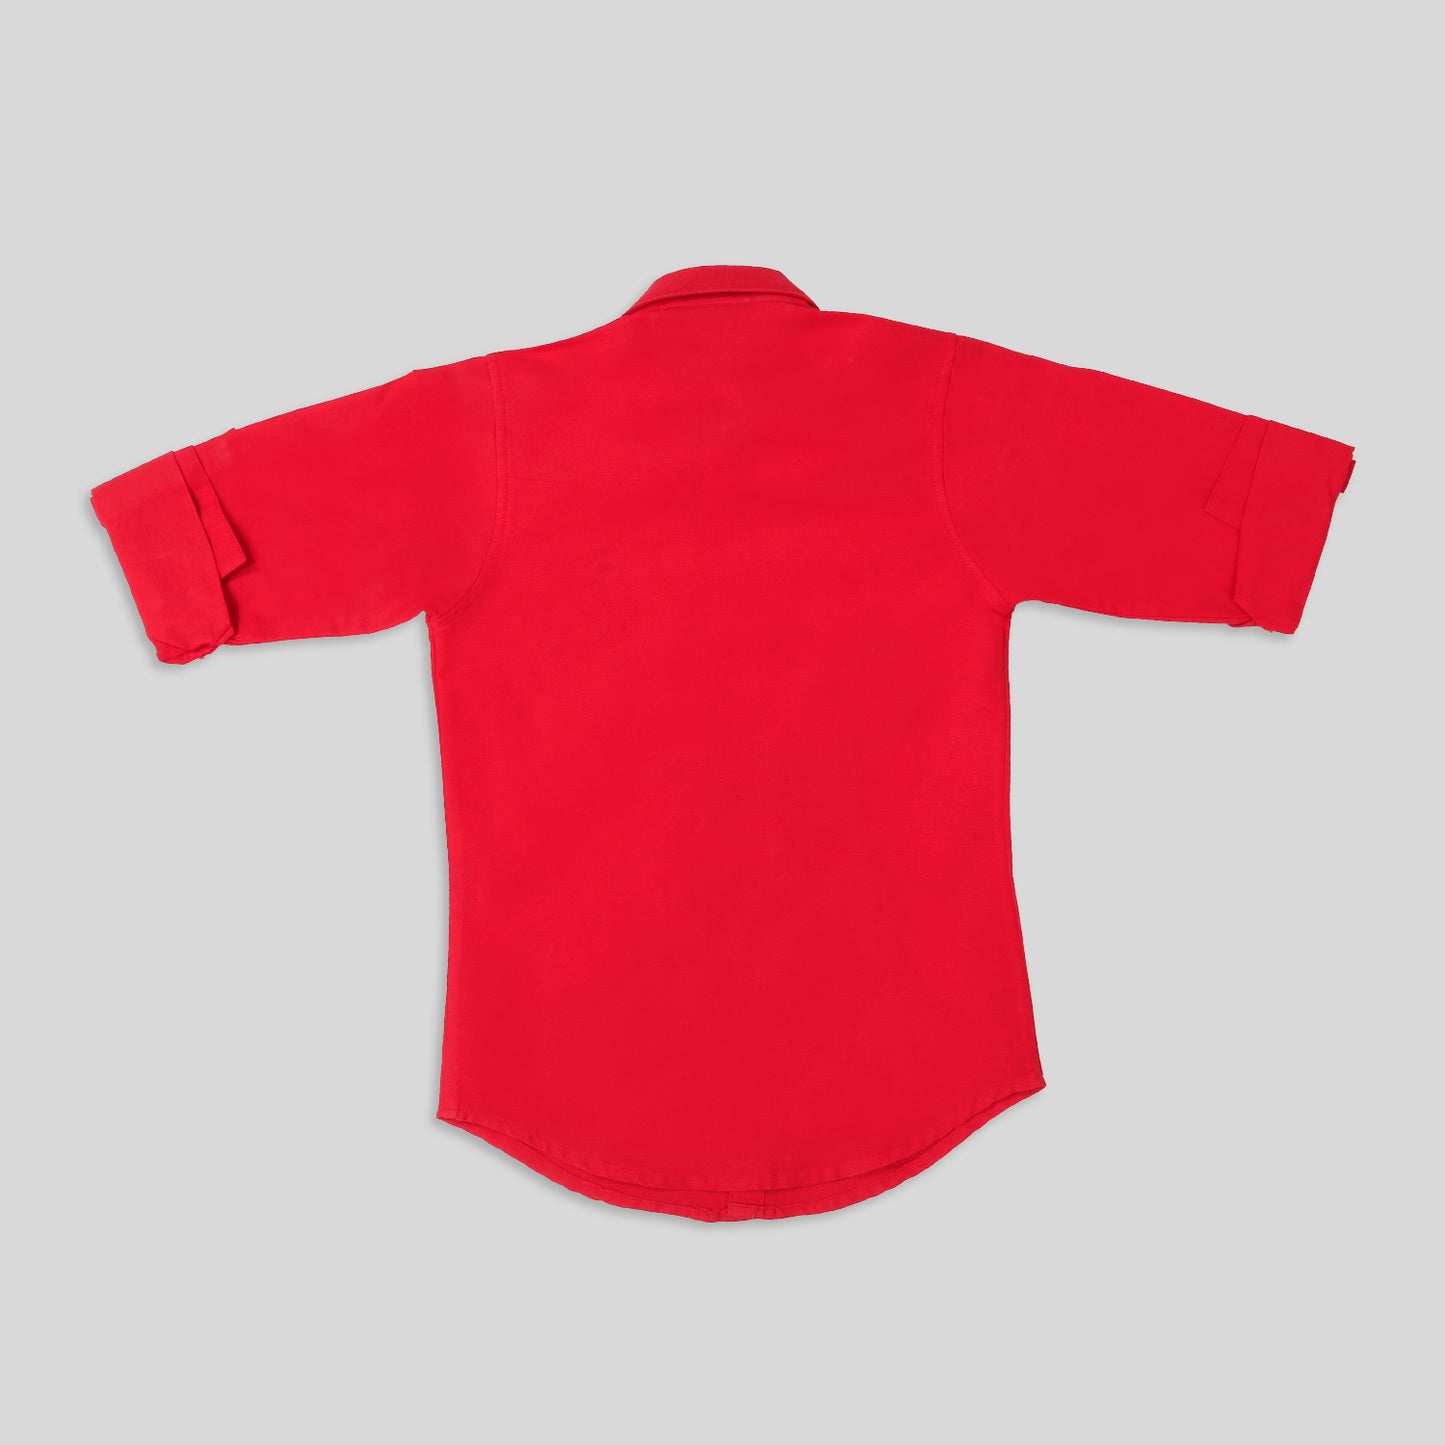 Collar Classic: Young Boys' Shirt for Timeless Casual Elegance!